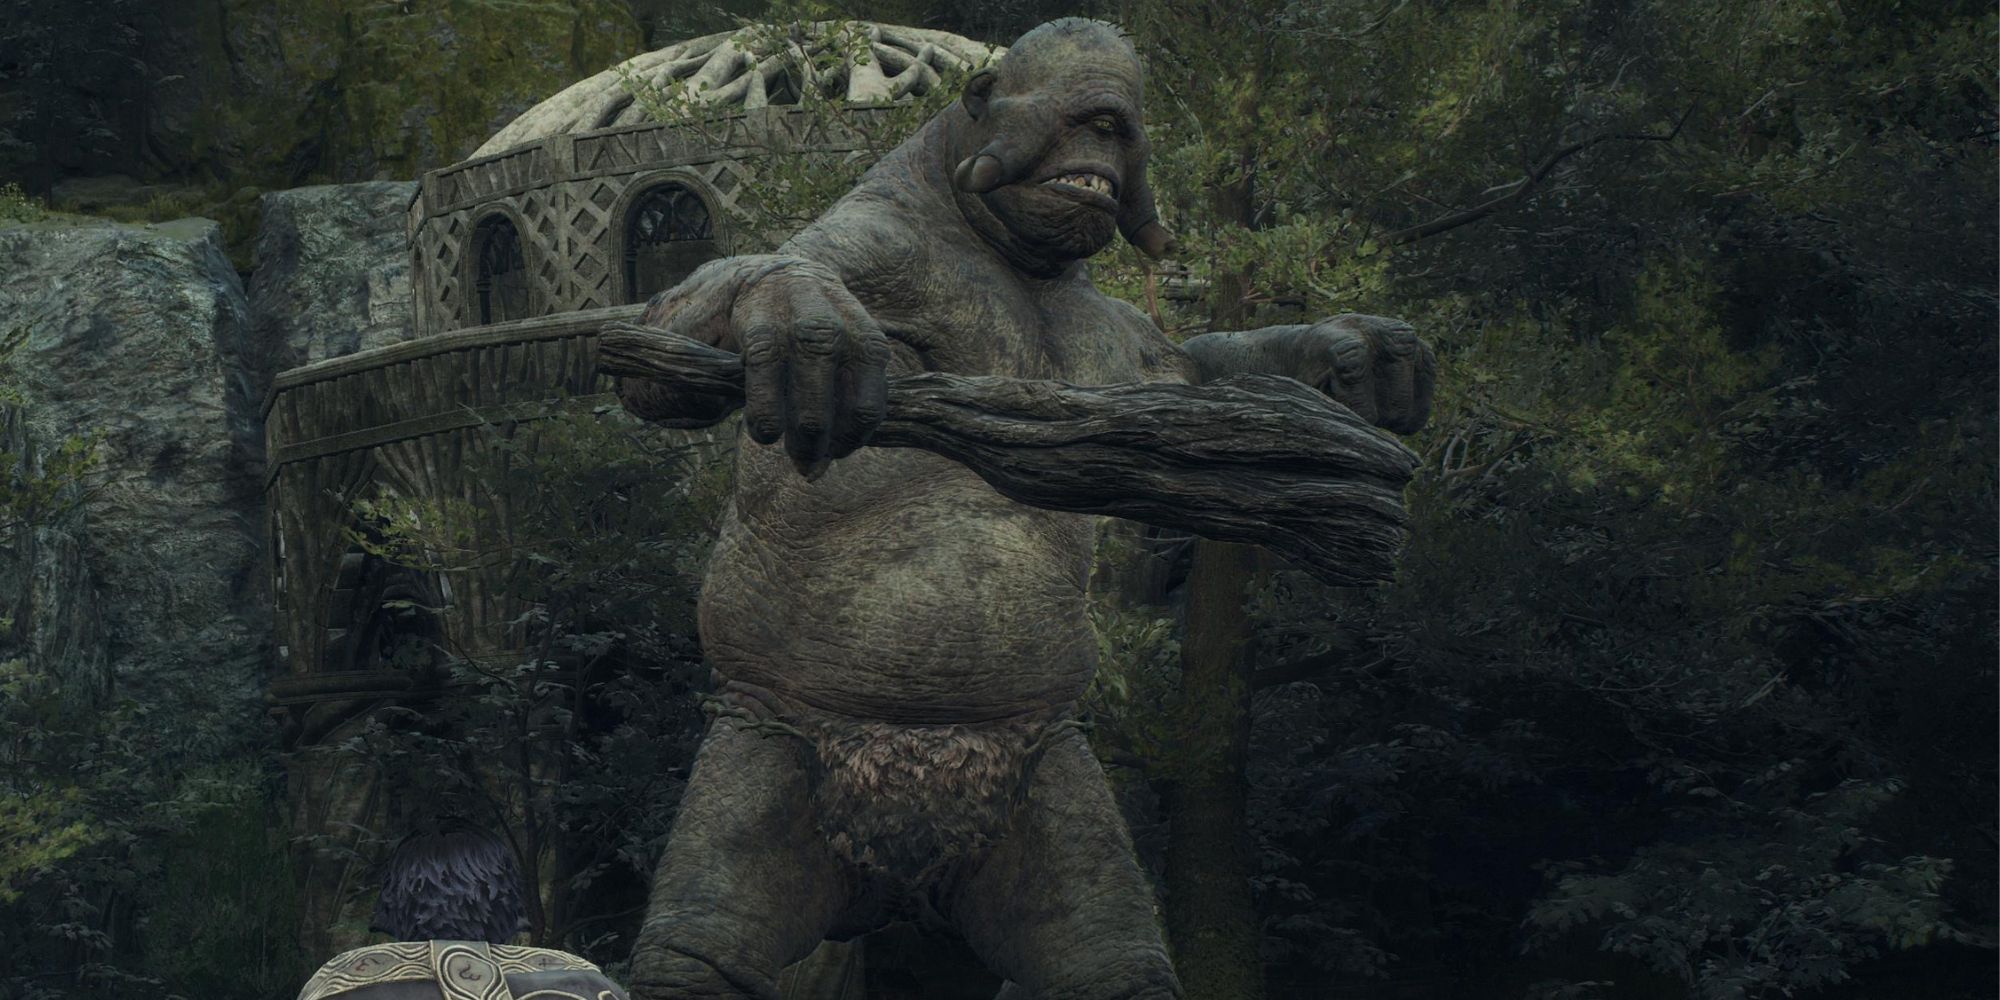 A Cyclops getting ready to punch in Dragon’s Dogma 2